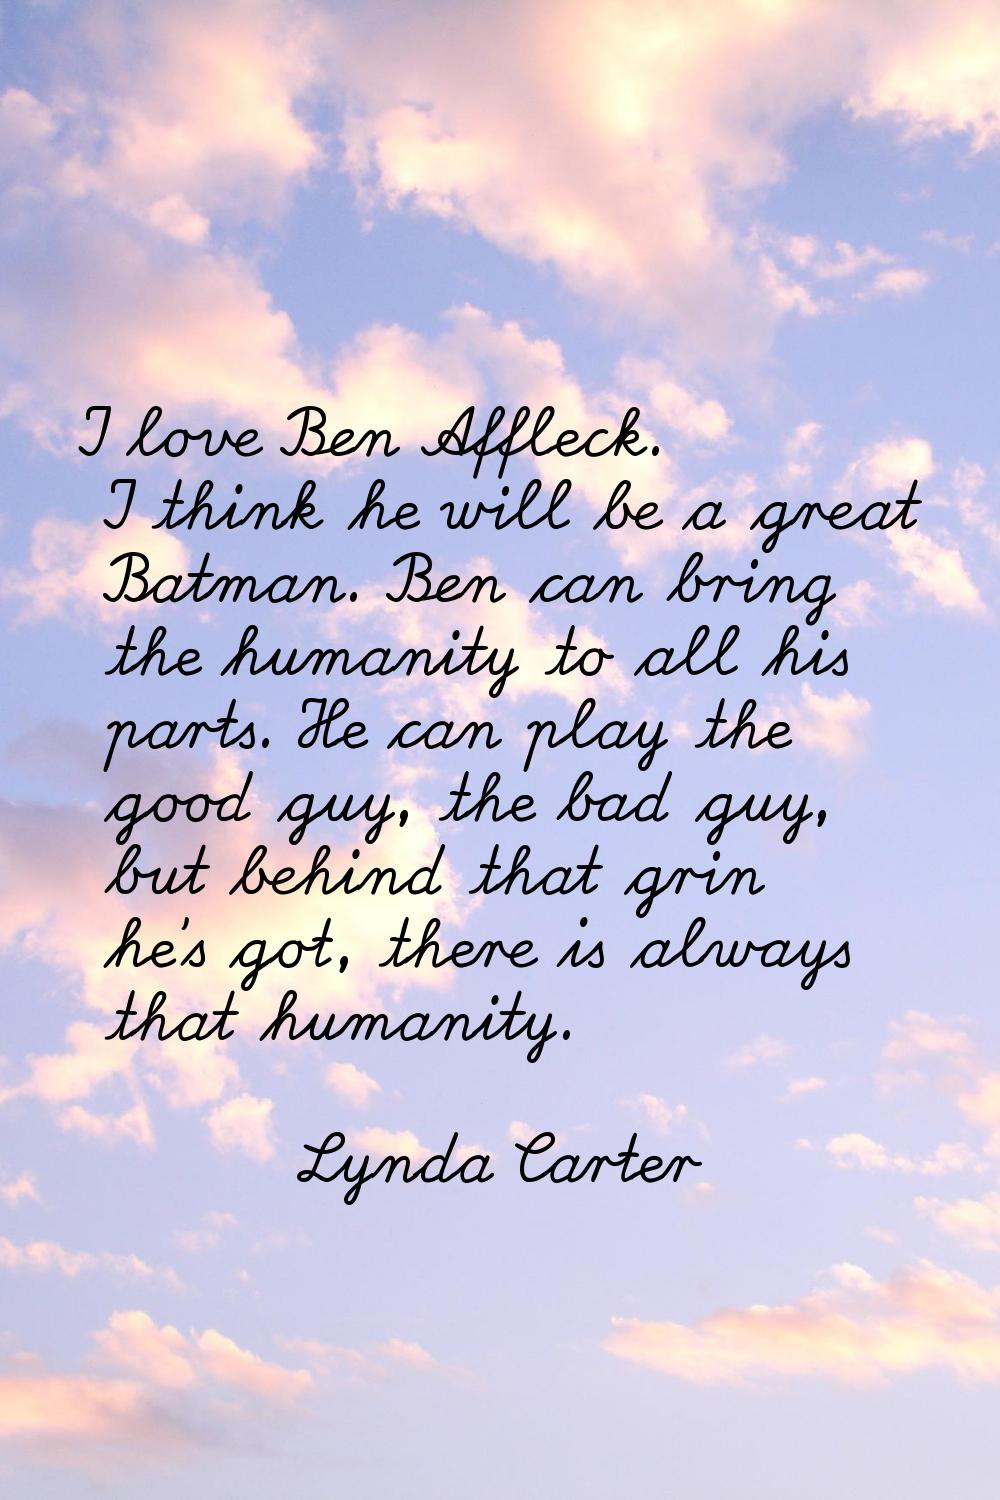 I love Ben Affleck. I think he will be a great Batman. Ben can bring the humanity to all his parts.